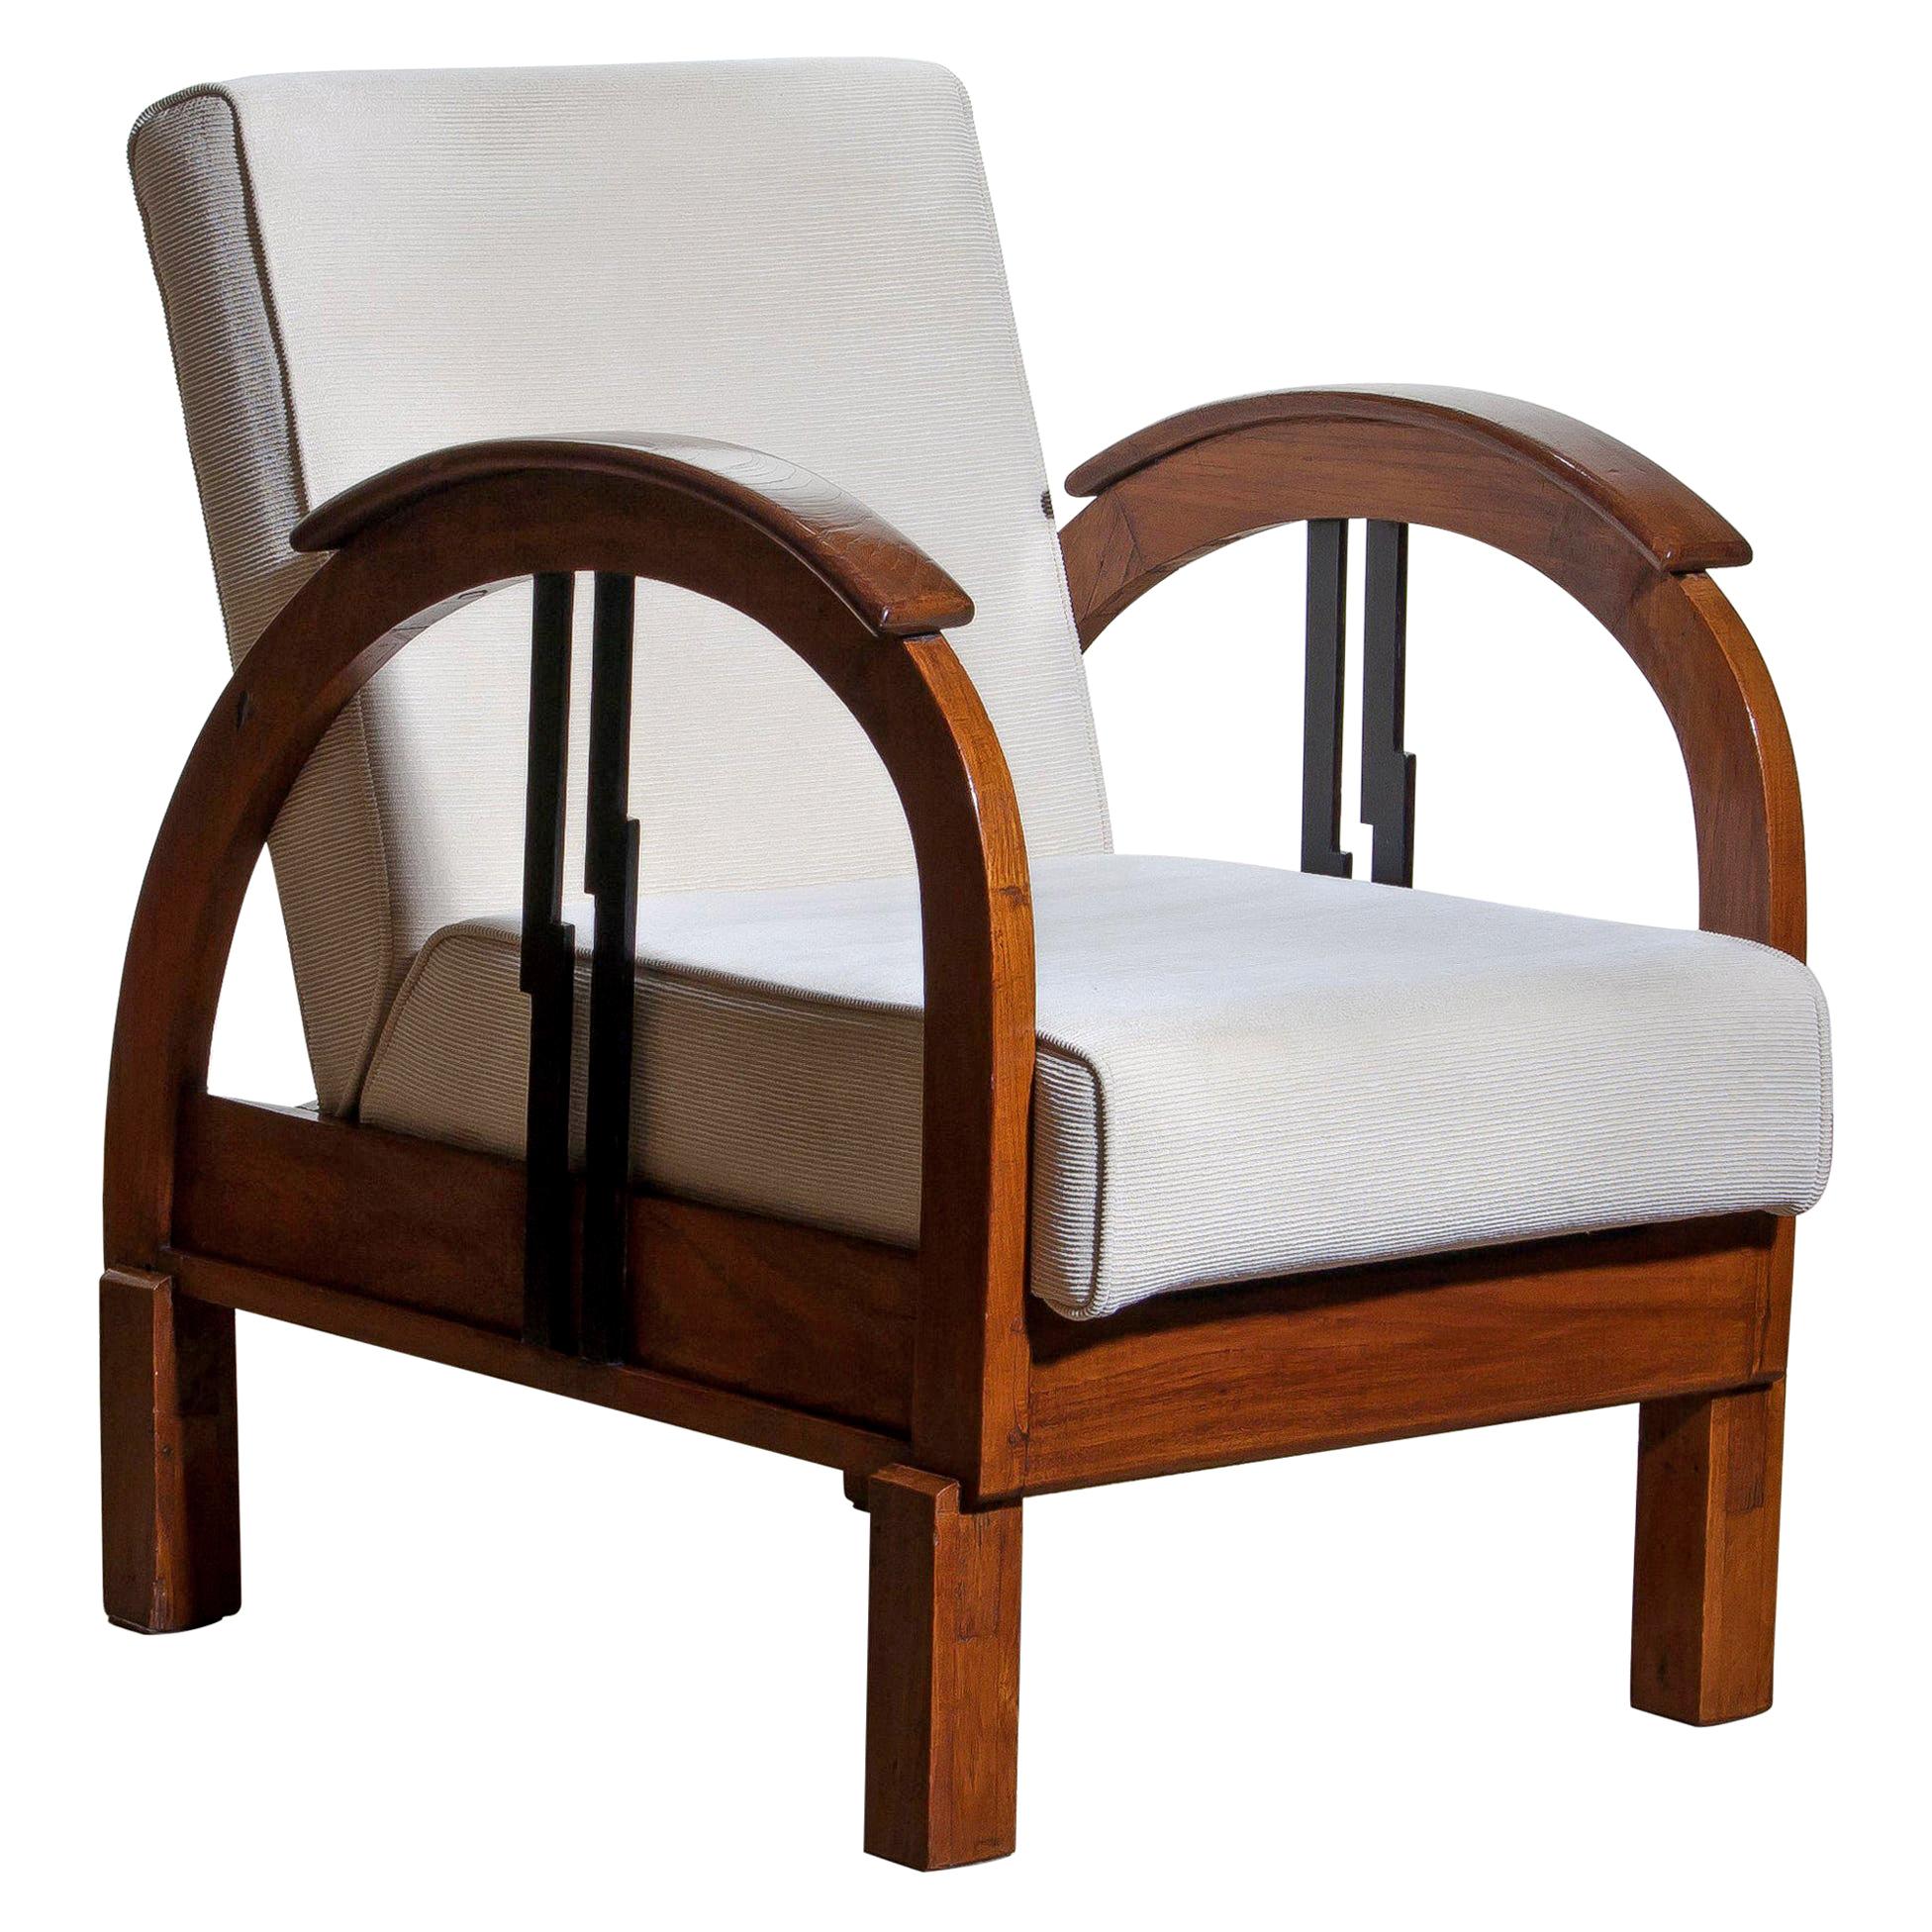 Beautiful Art Deco club lounge armchair.
The chair is made of oak with a later off-white corded fabric.
It is in wonderful condition.